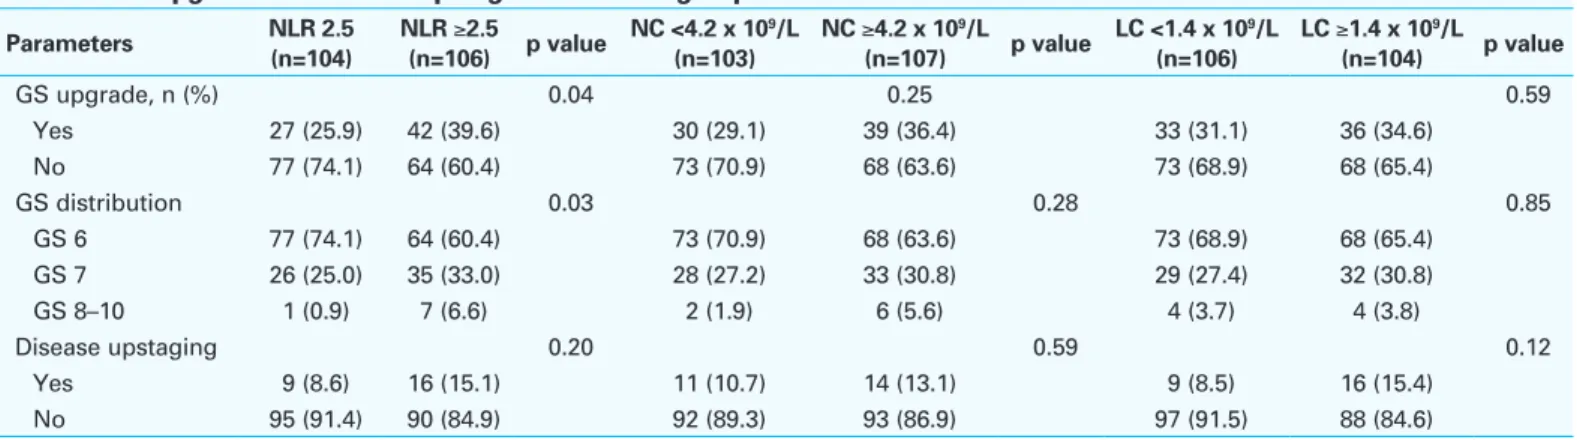 Table 2. GS upgrade and disease upstage rates of the groups Parameters  NLR 2.5  (n=104) NLR ≥2.5 (n=106) p value NC &lt;4.2 x 10 9 /L (n=103) NC ≥4.2 x 10 9 /L (n=107) p value LC &lt;1.4 x 10 9 /L (n=106) LC ≥1.4 x 10 9 /L (n=104) p value GS upgrade, n (%